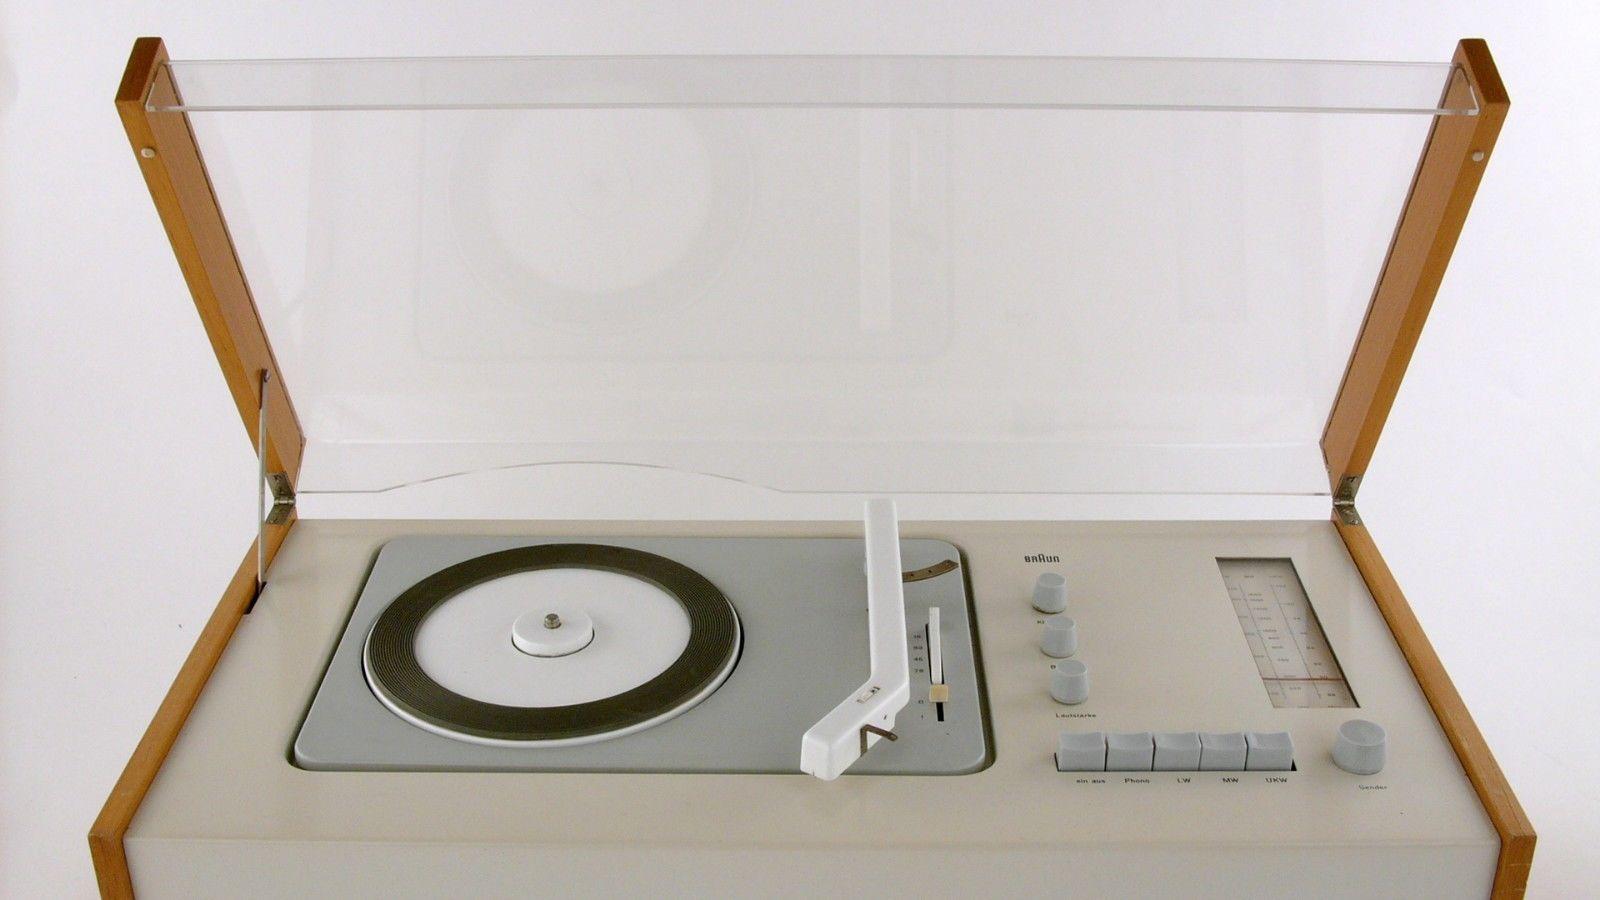 SK61 Record Player designed by Dieter Rams and Hans Gugelot for Braun, 1966. The radio-phonograph combination is in excellent near mint cosmetic condition, and full working order. It has a four speed record player, 78, 45, 33, 16 rpm. The tube radio